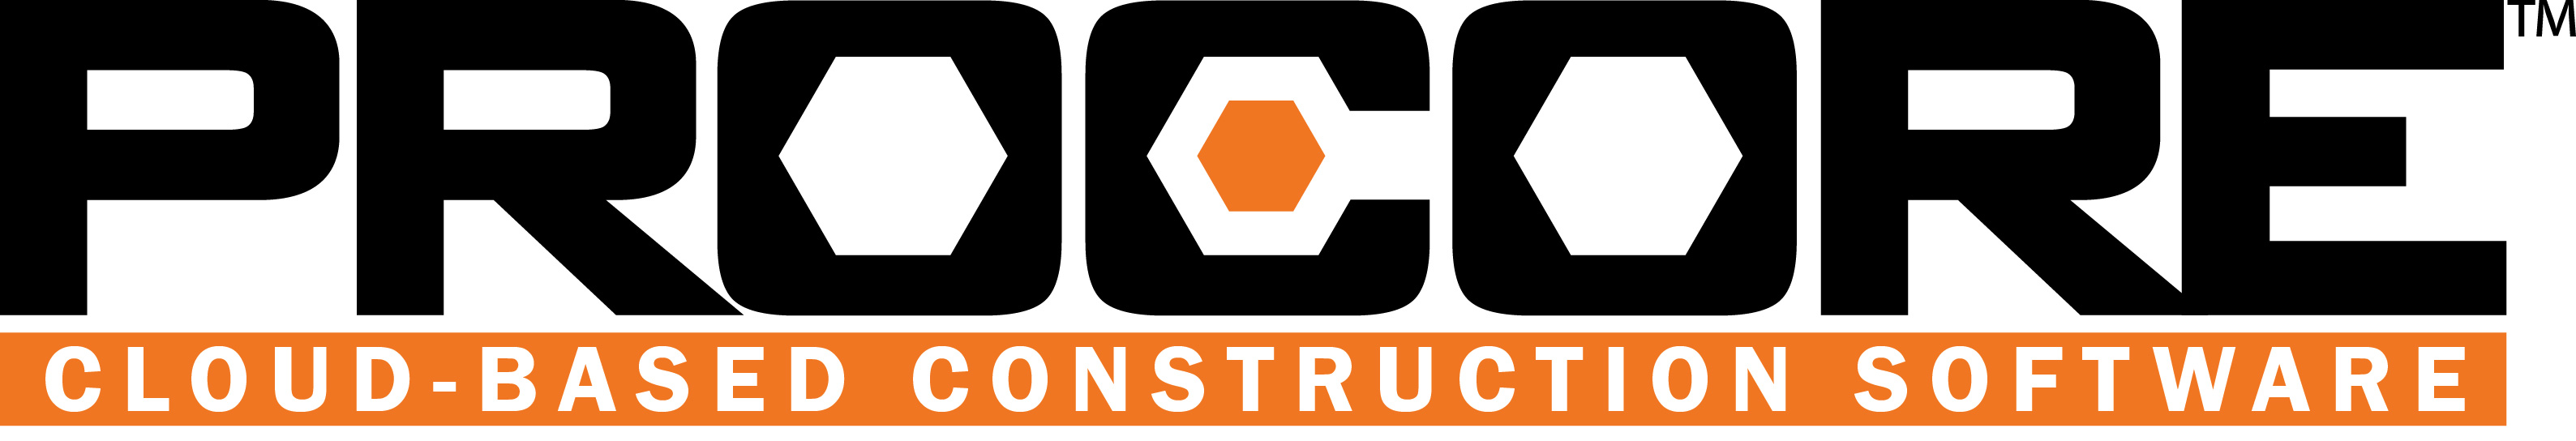 Procore Cloud-Based Construction Software